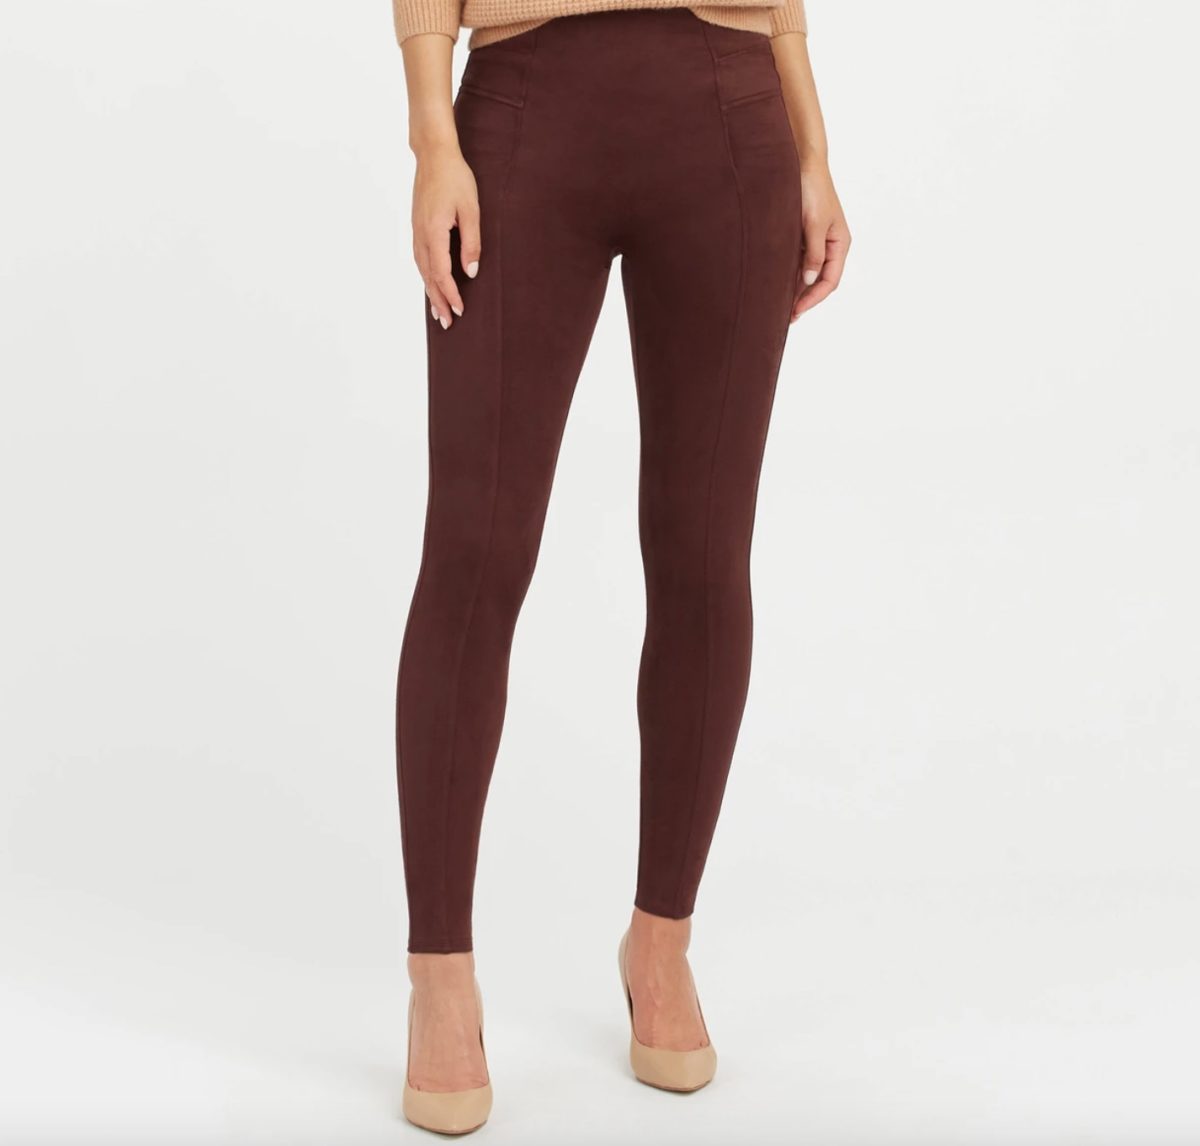 if you don't own a pair of spanx leggings, you're doing it wrong